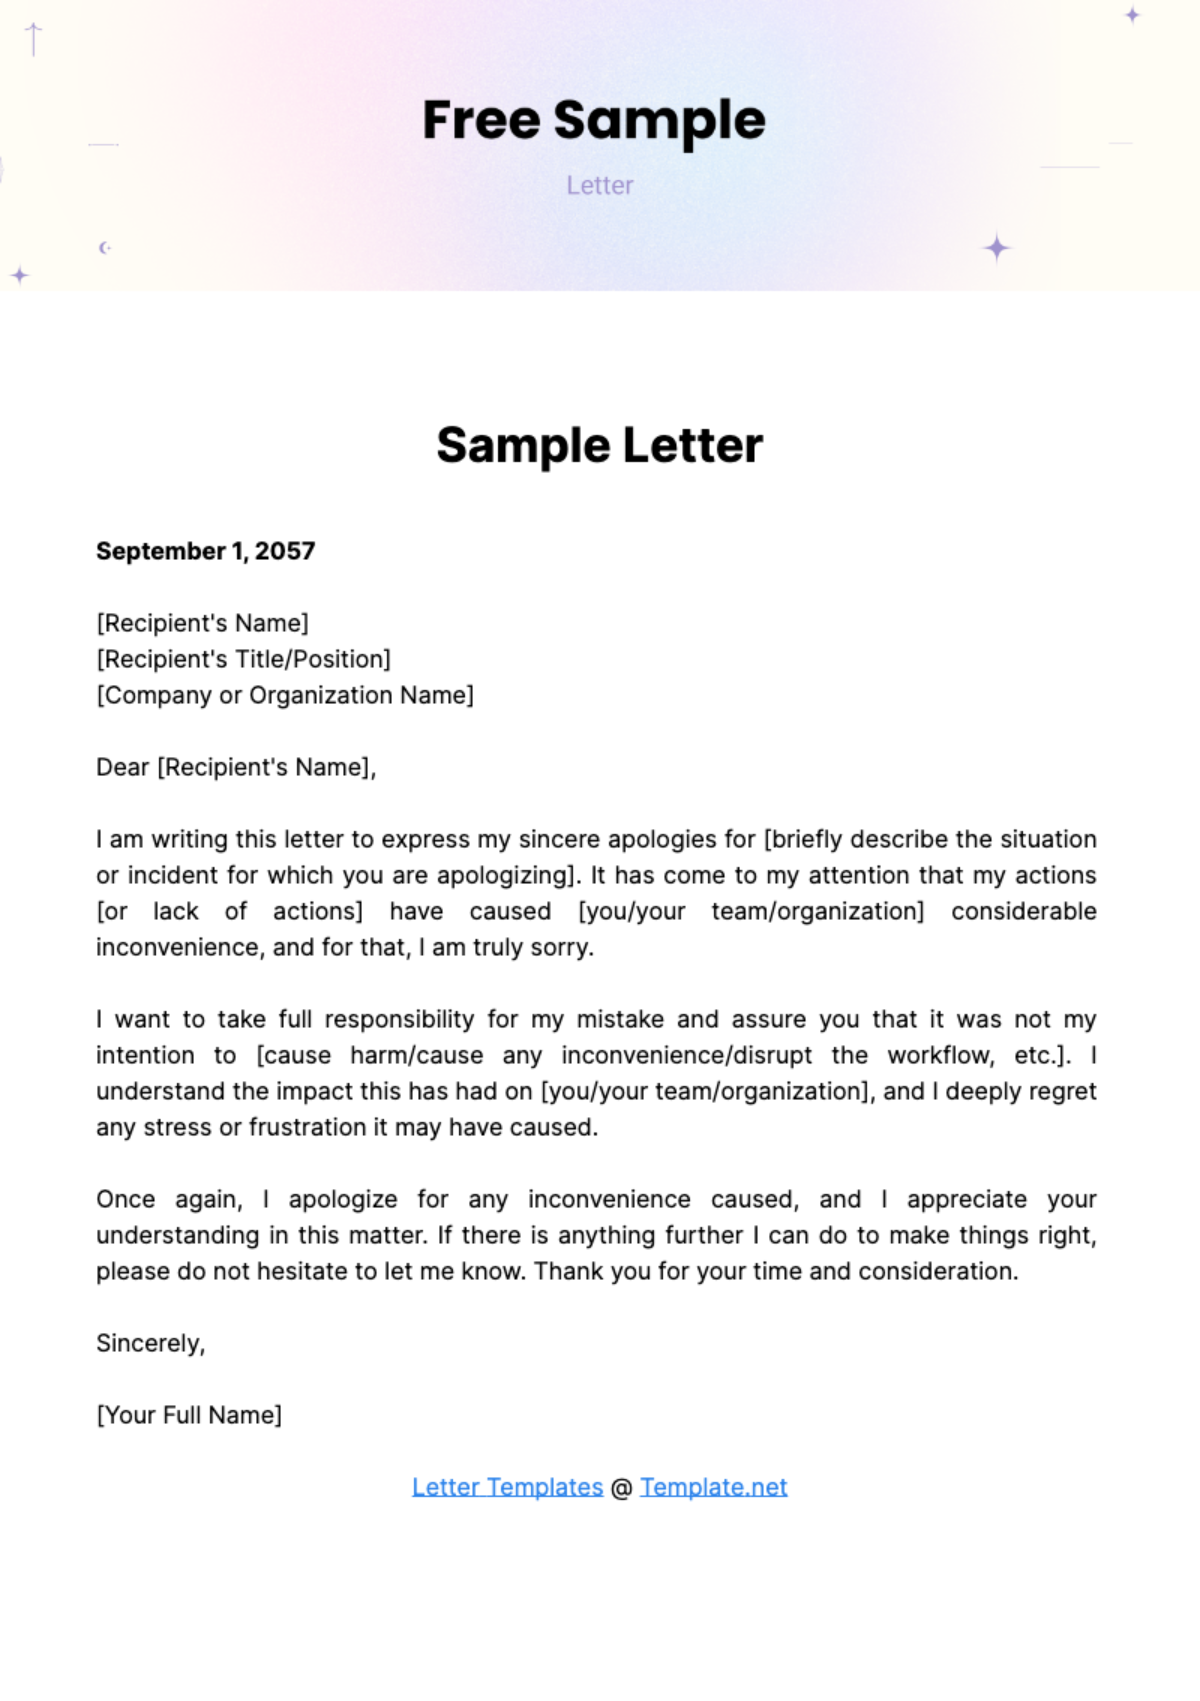 Free Sample Letter Template